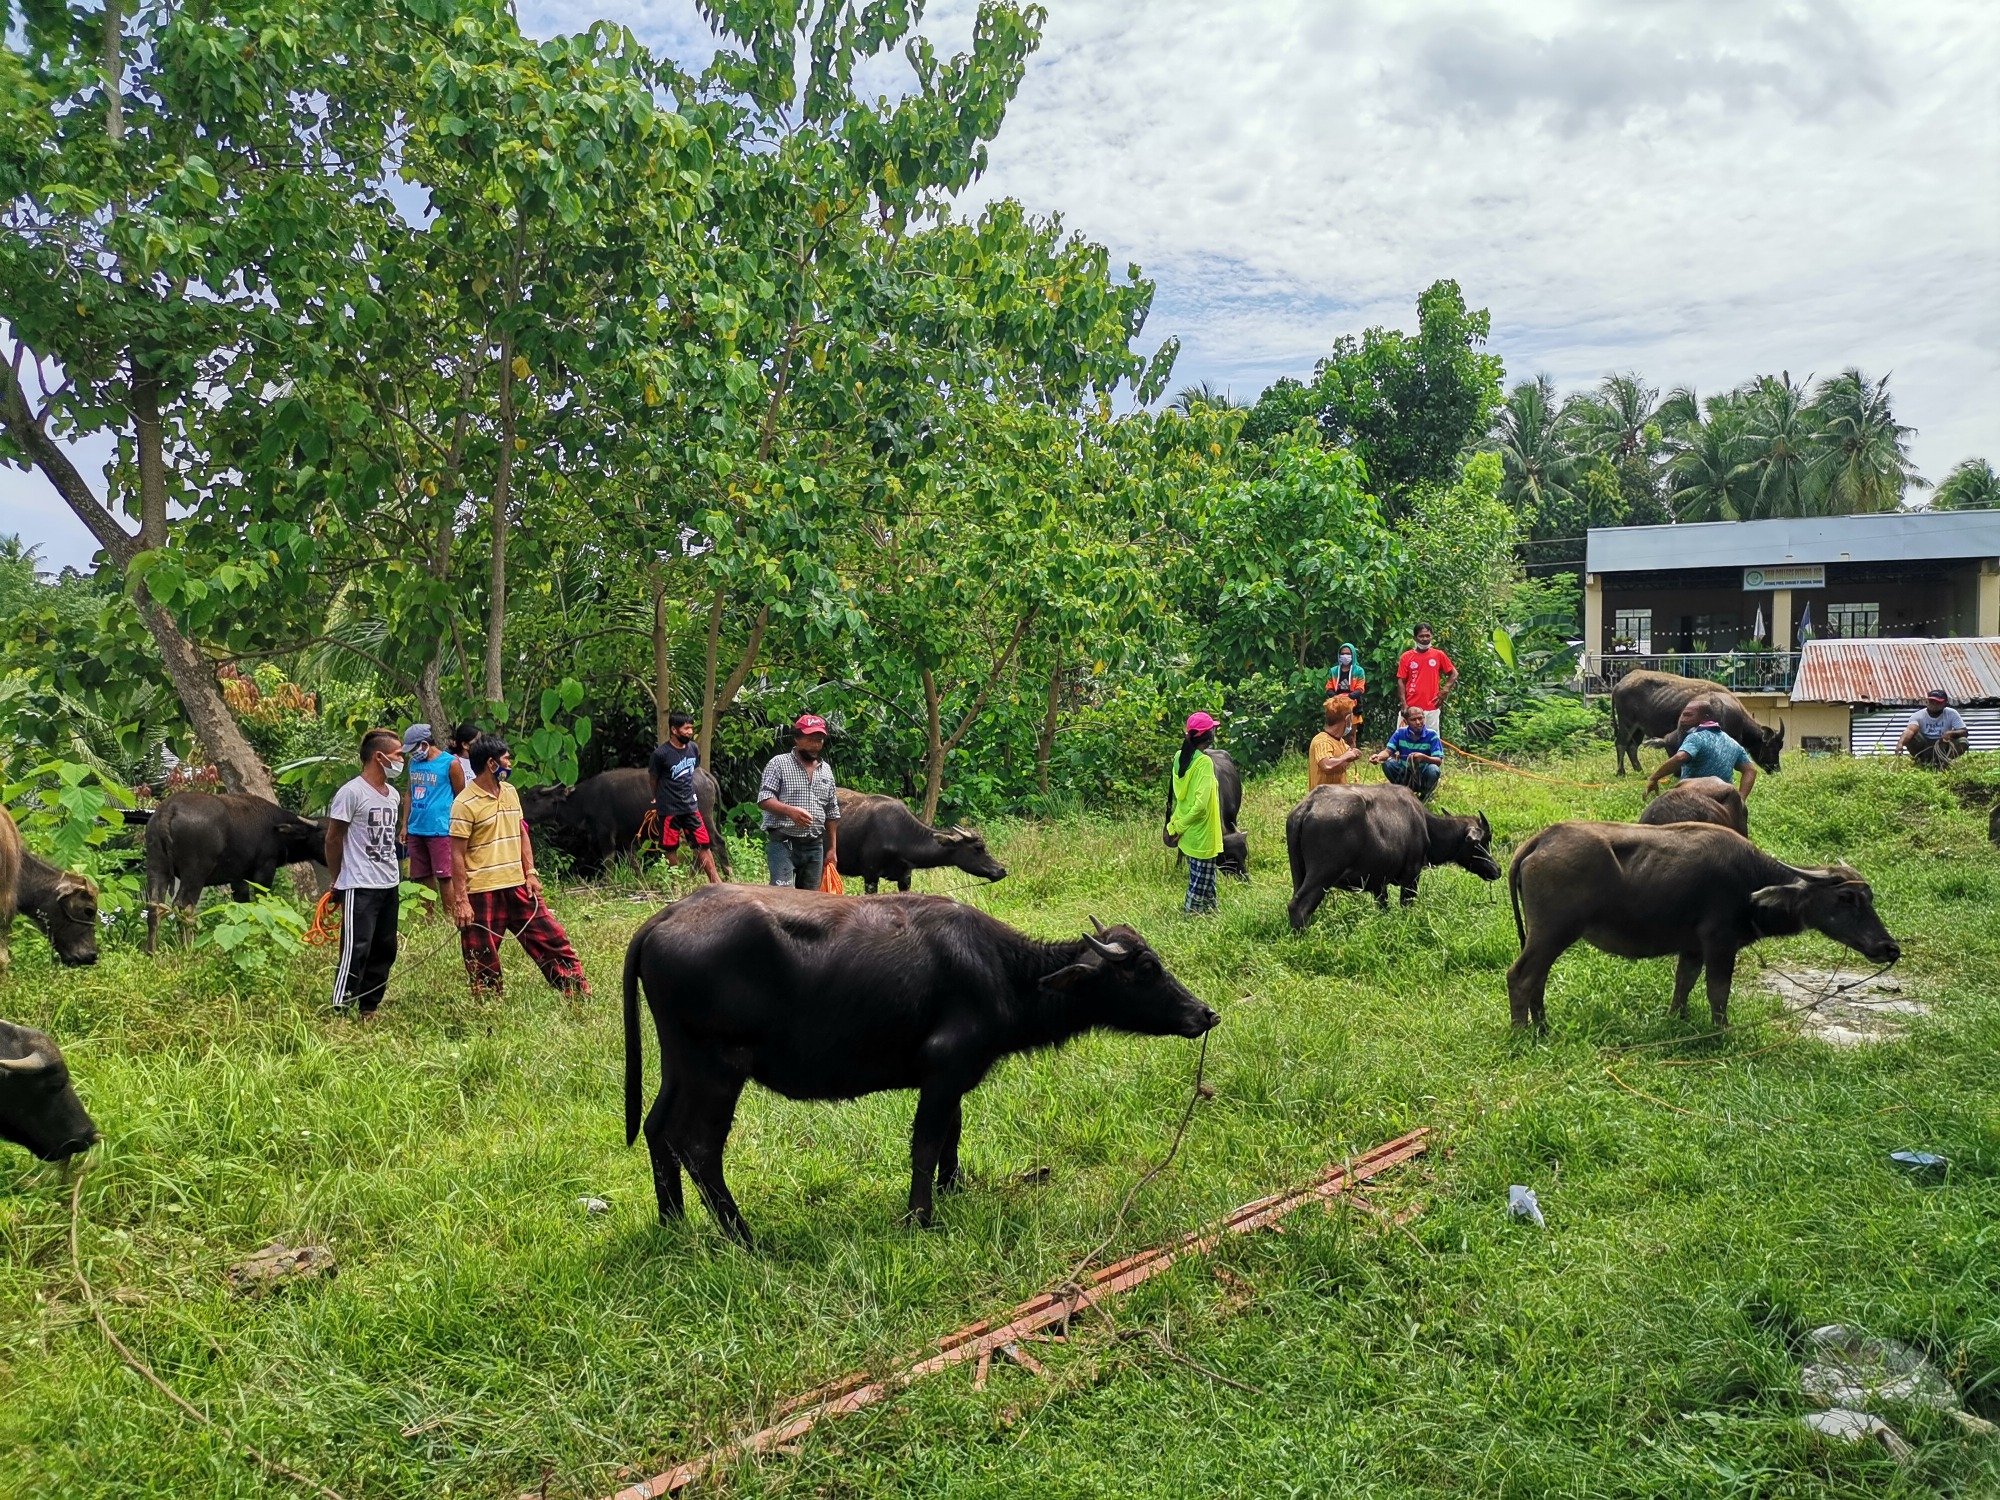 60 Bohol farmers receive Php 2.1M worth of carabaos as draft animals